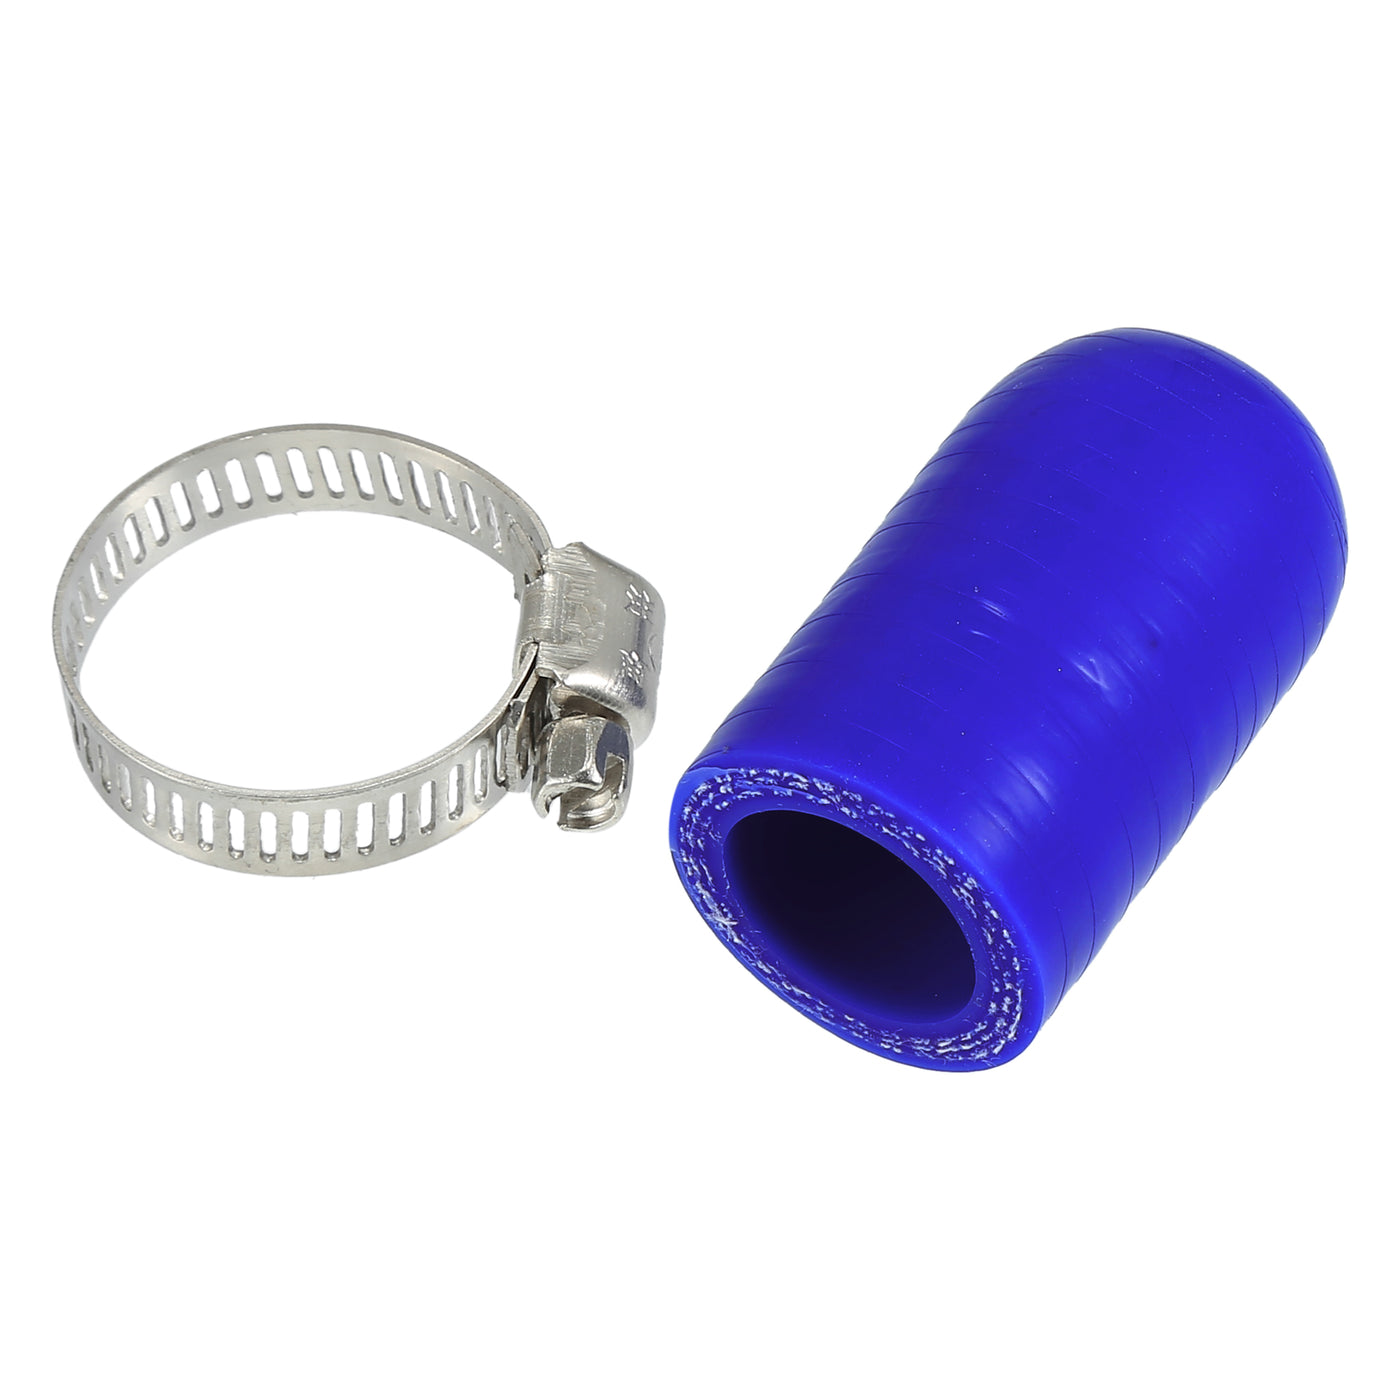 X AUTOHAUX 1 Set 30mm Length 18mm/0.71" ID Blue Car Silicone Rubber Hose End Cap with Clamps Silicone Reinforced Blanking Cap for Bypass Tube Universal